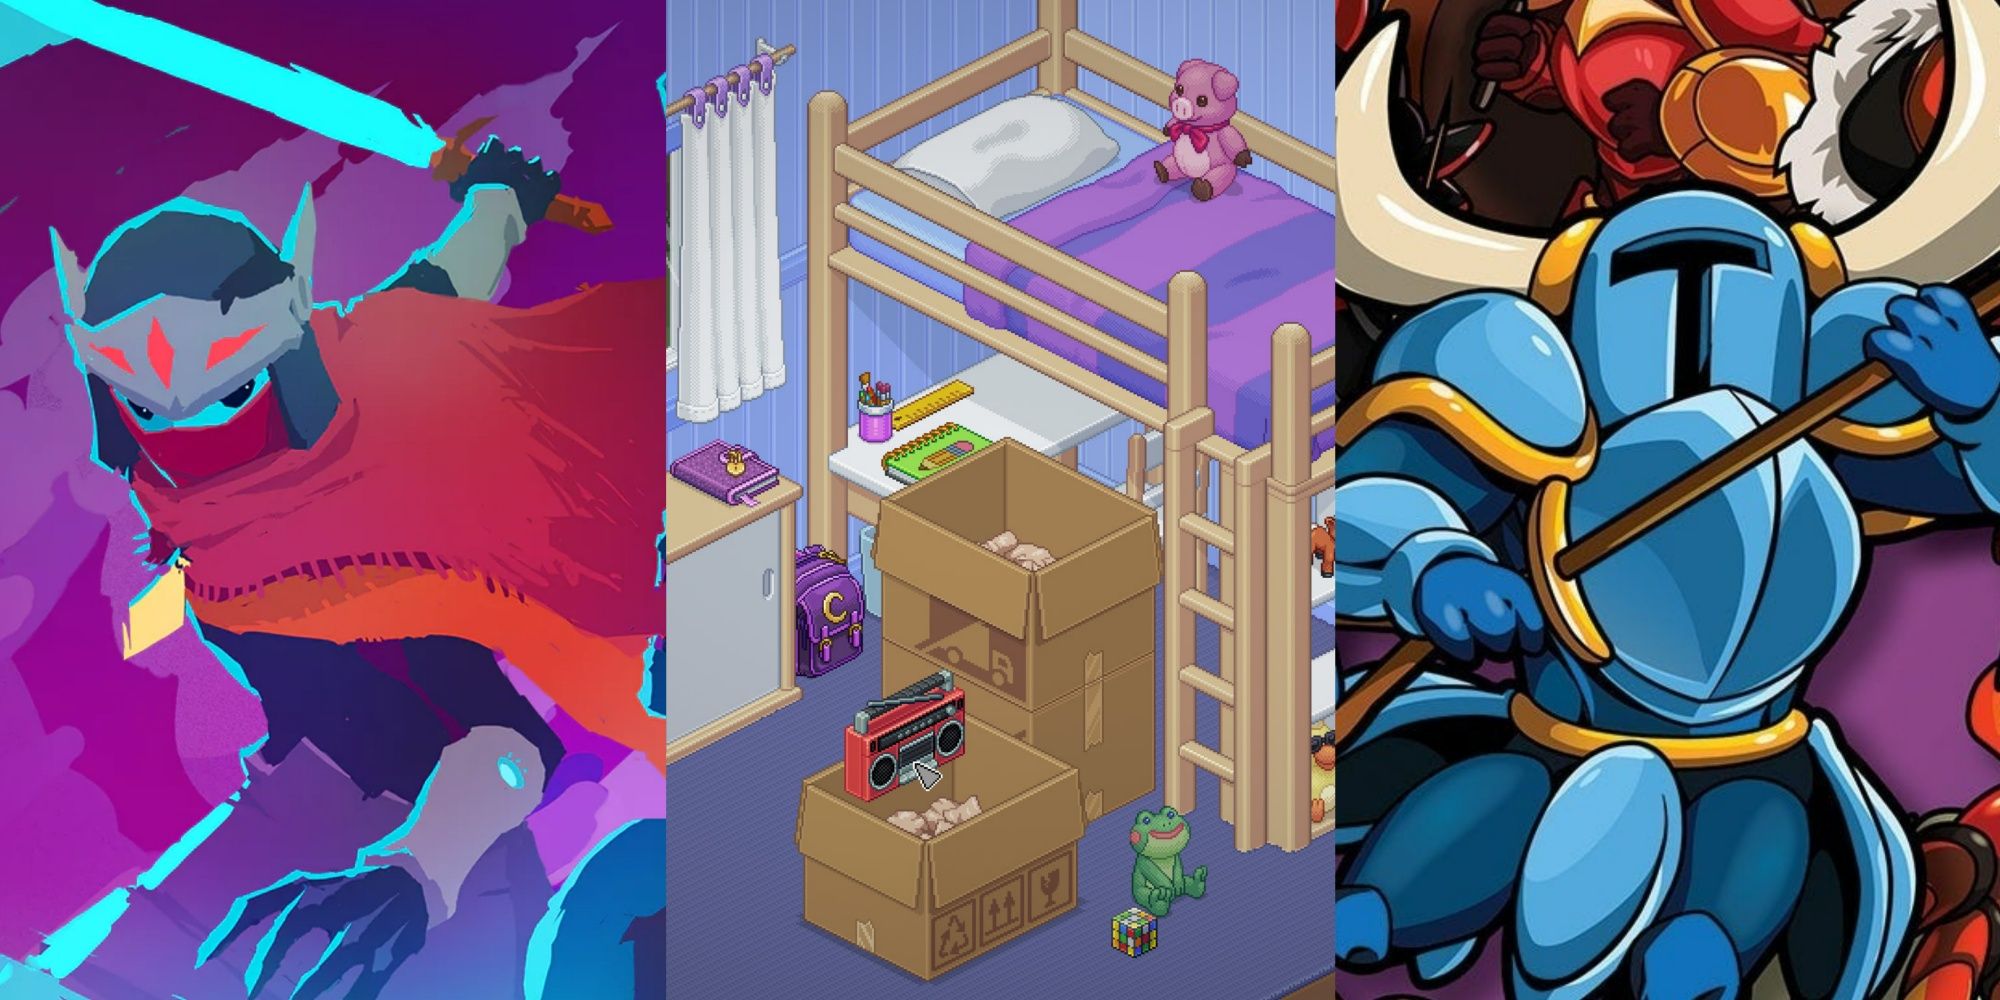 The protagonist of Hyper Light Drifter readying their sword, a child's bedroom in Unpacking, and the protagonist of Shovel Knight holding a shovel